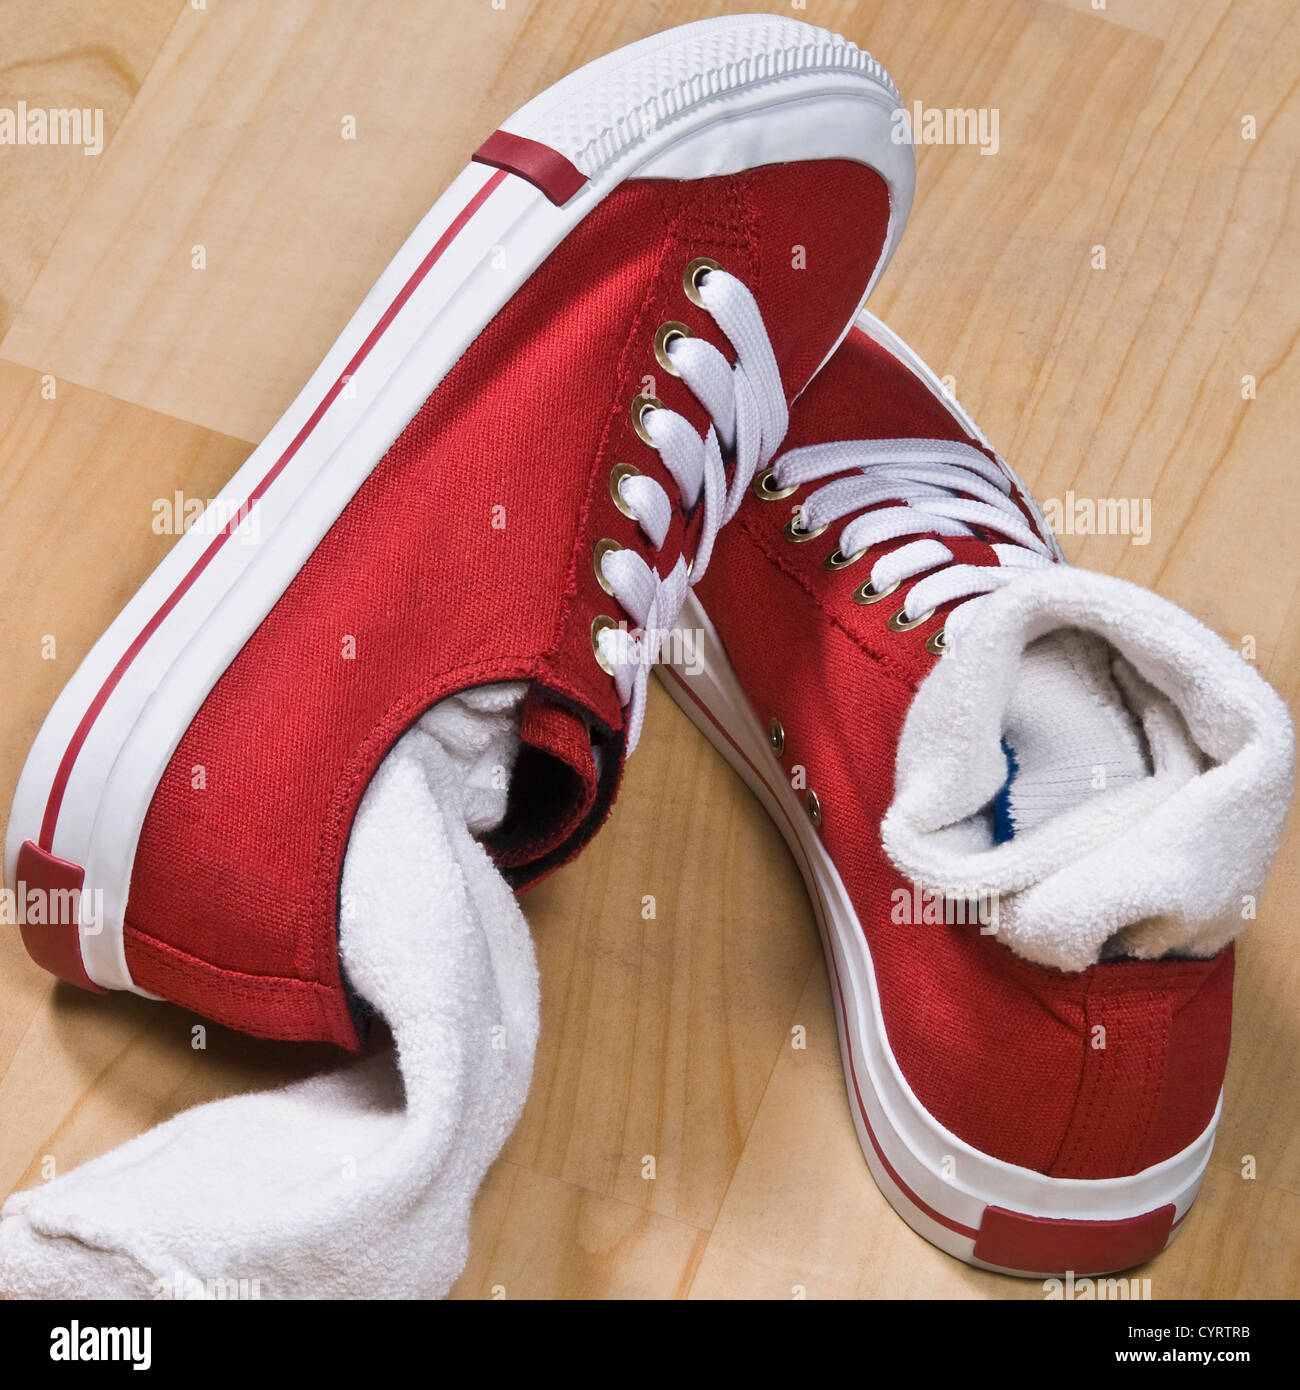 canvas shoes with socks Stock Photo 